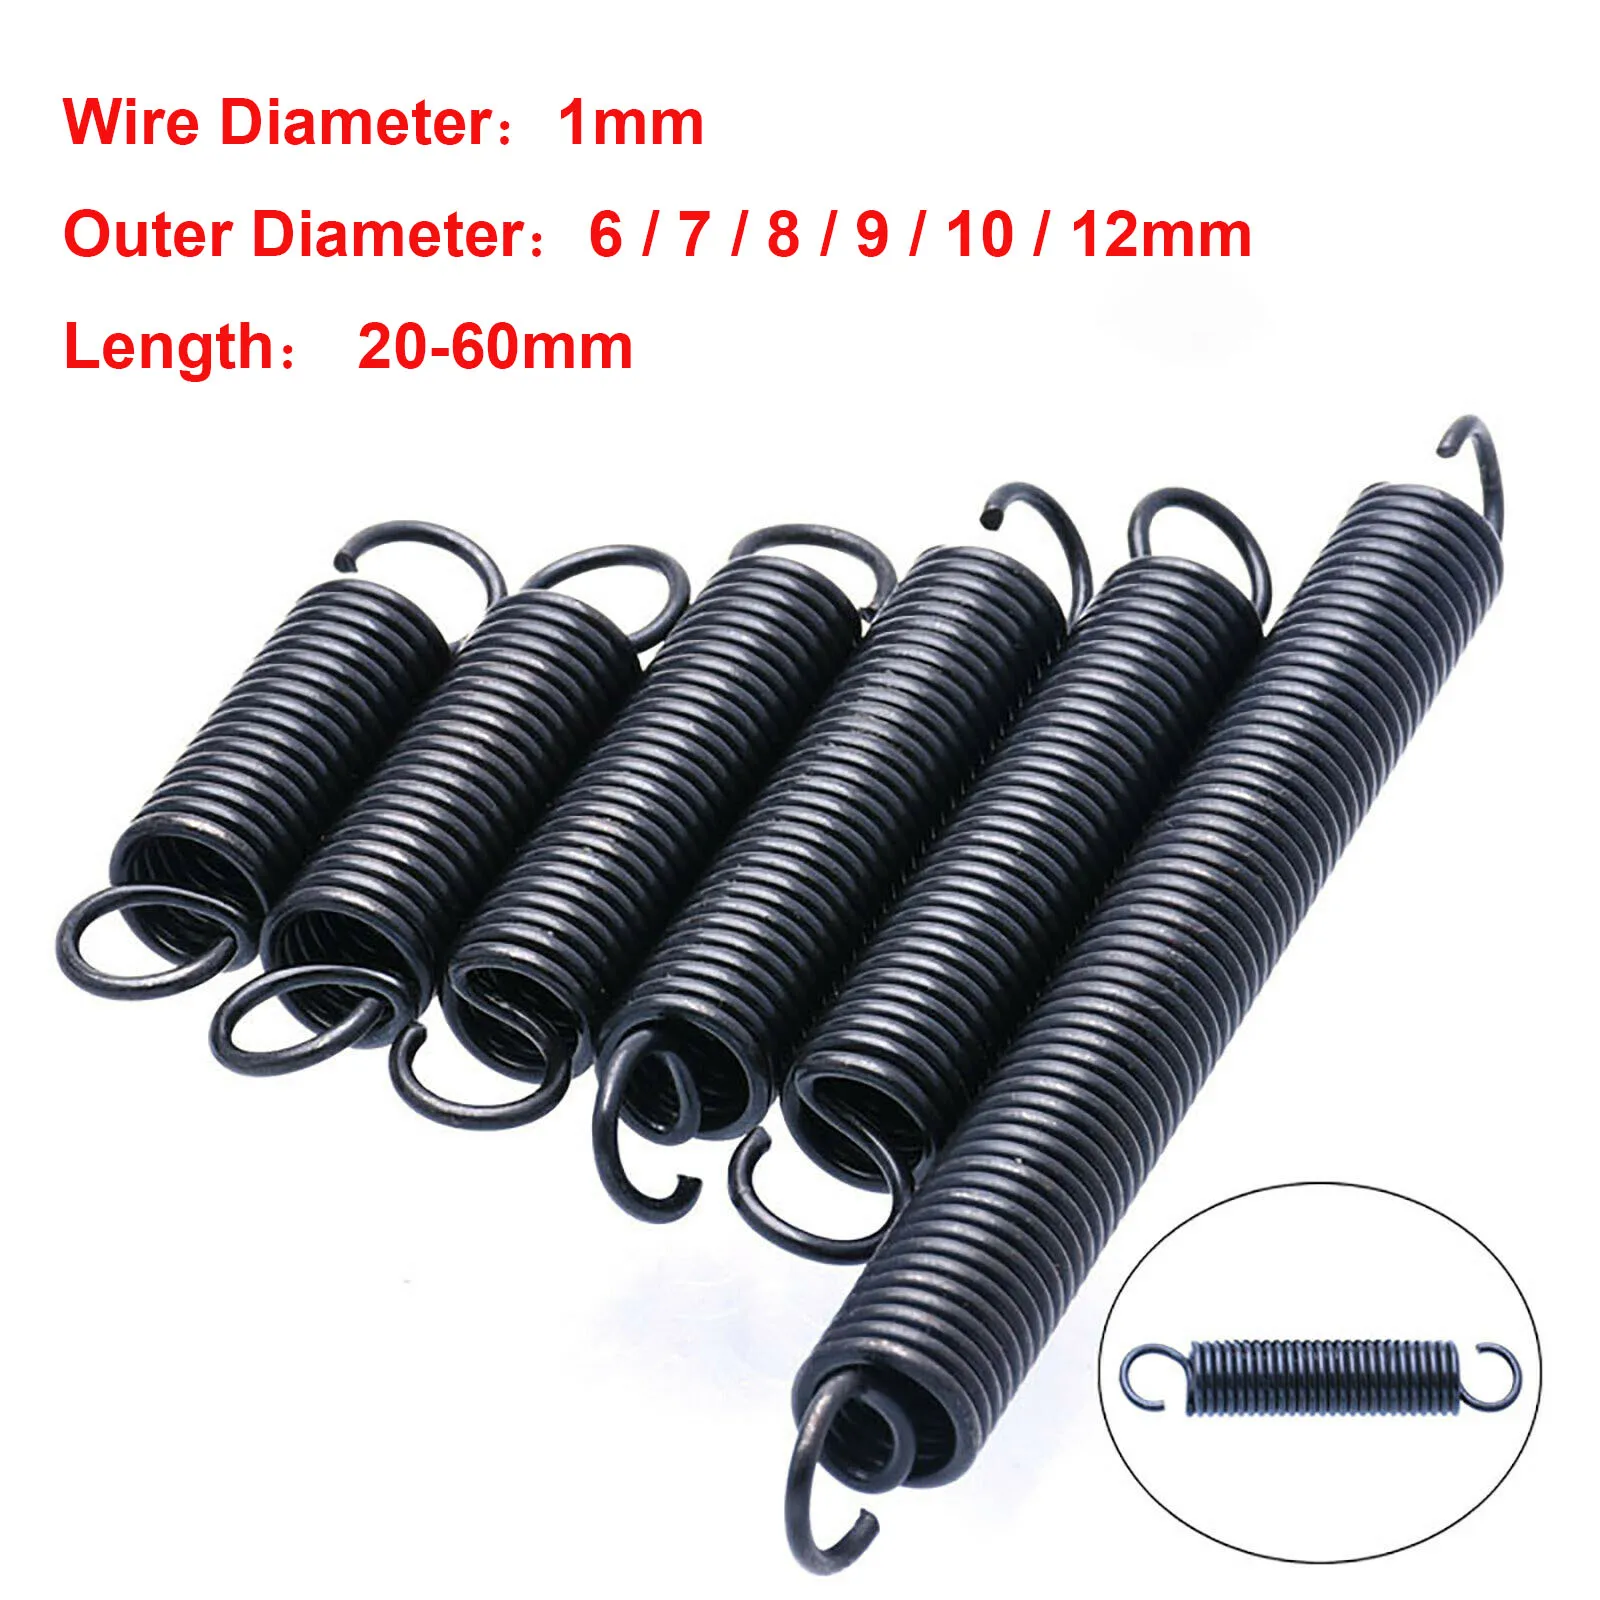 25-60mm Steel Long Extension Spring,5pcs Extension Spring,With Hooks 1mm Wire Diameter Small Tension Springs Pangocho JINchao-Compression Spring ，Not easily deformed Length : 1 x 10 x 25mm 